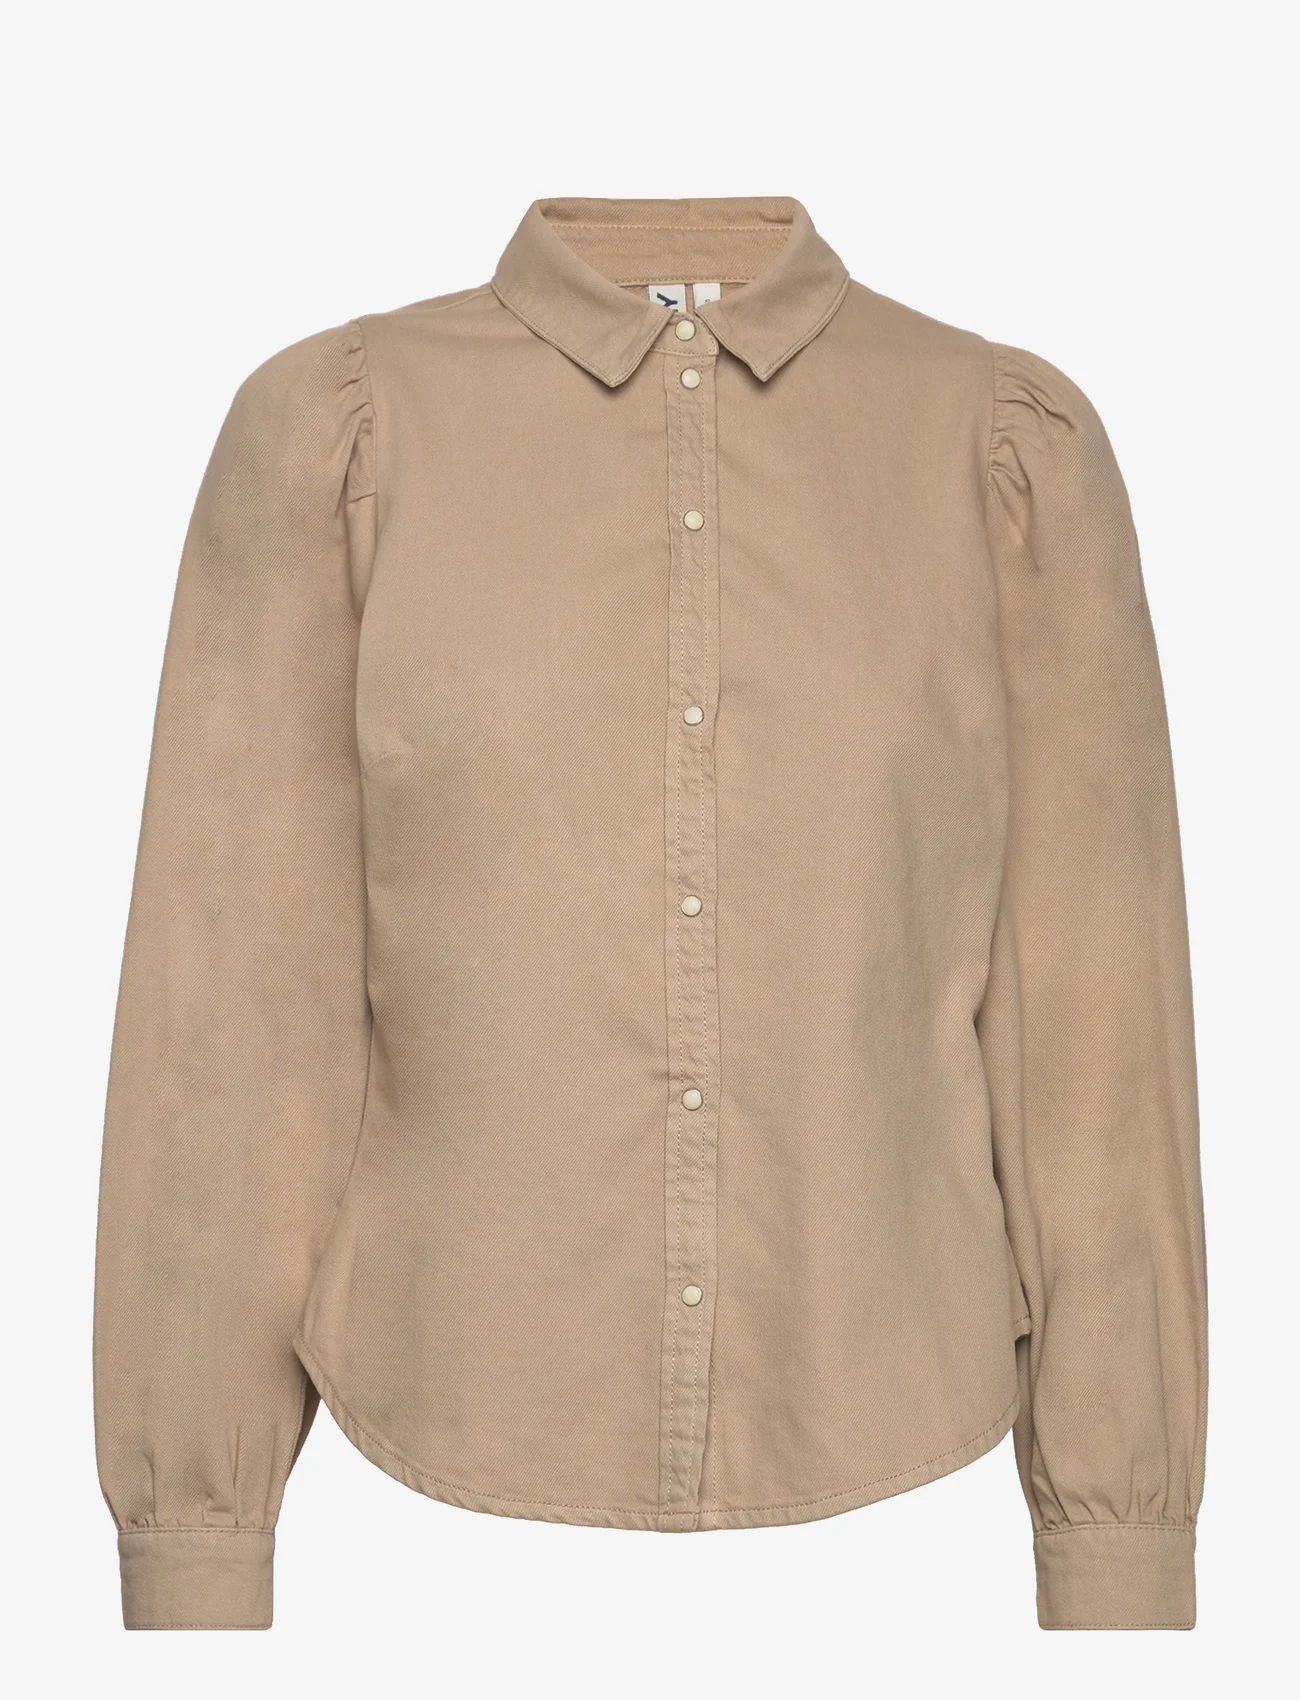 ONLY - ONLROCCO L/S COL SHIRT PNT - oxford tan - 0